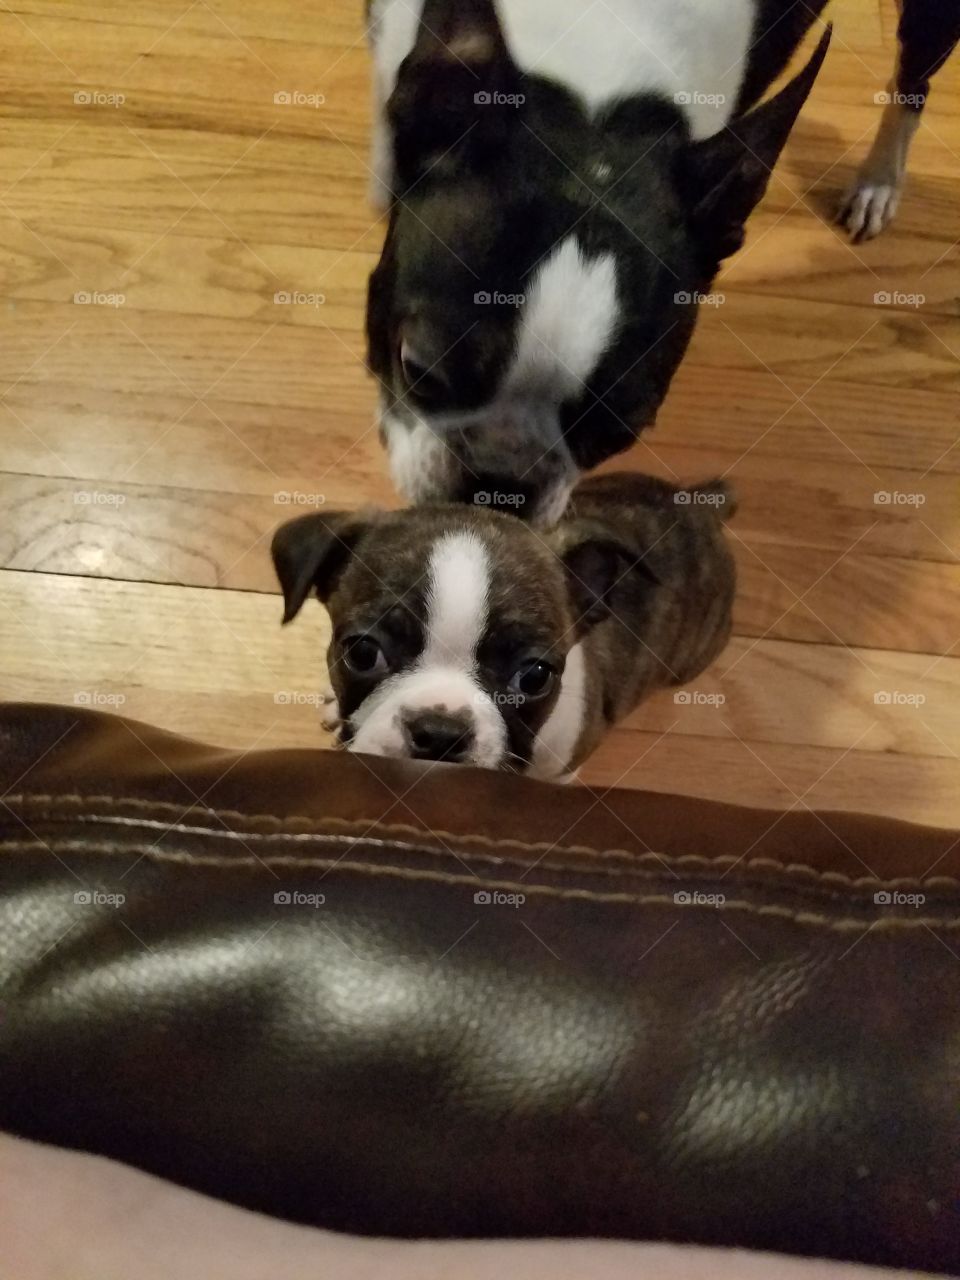 Piggy loves his new puppy